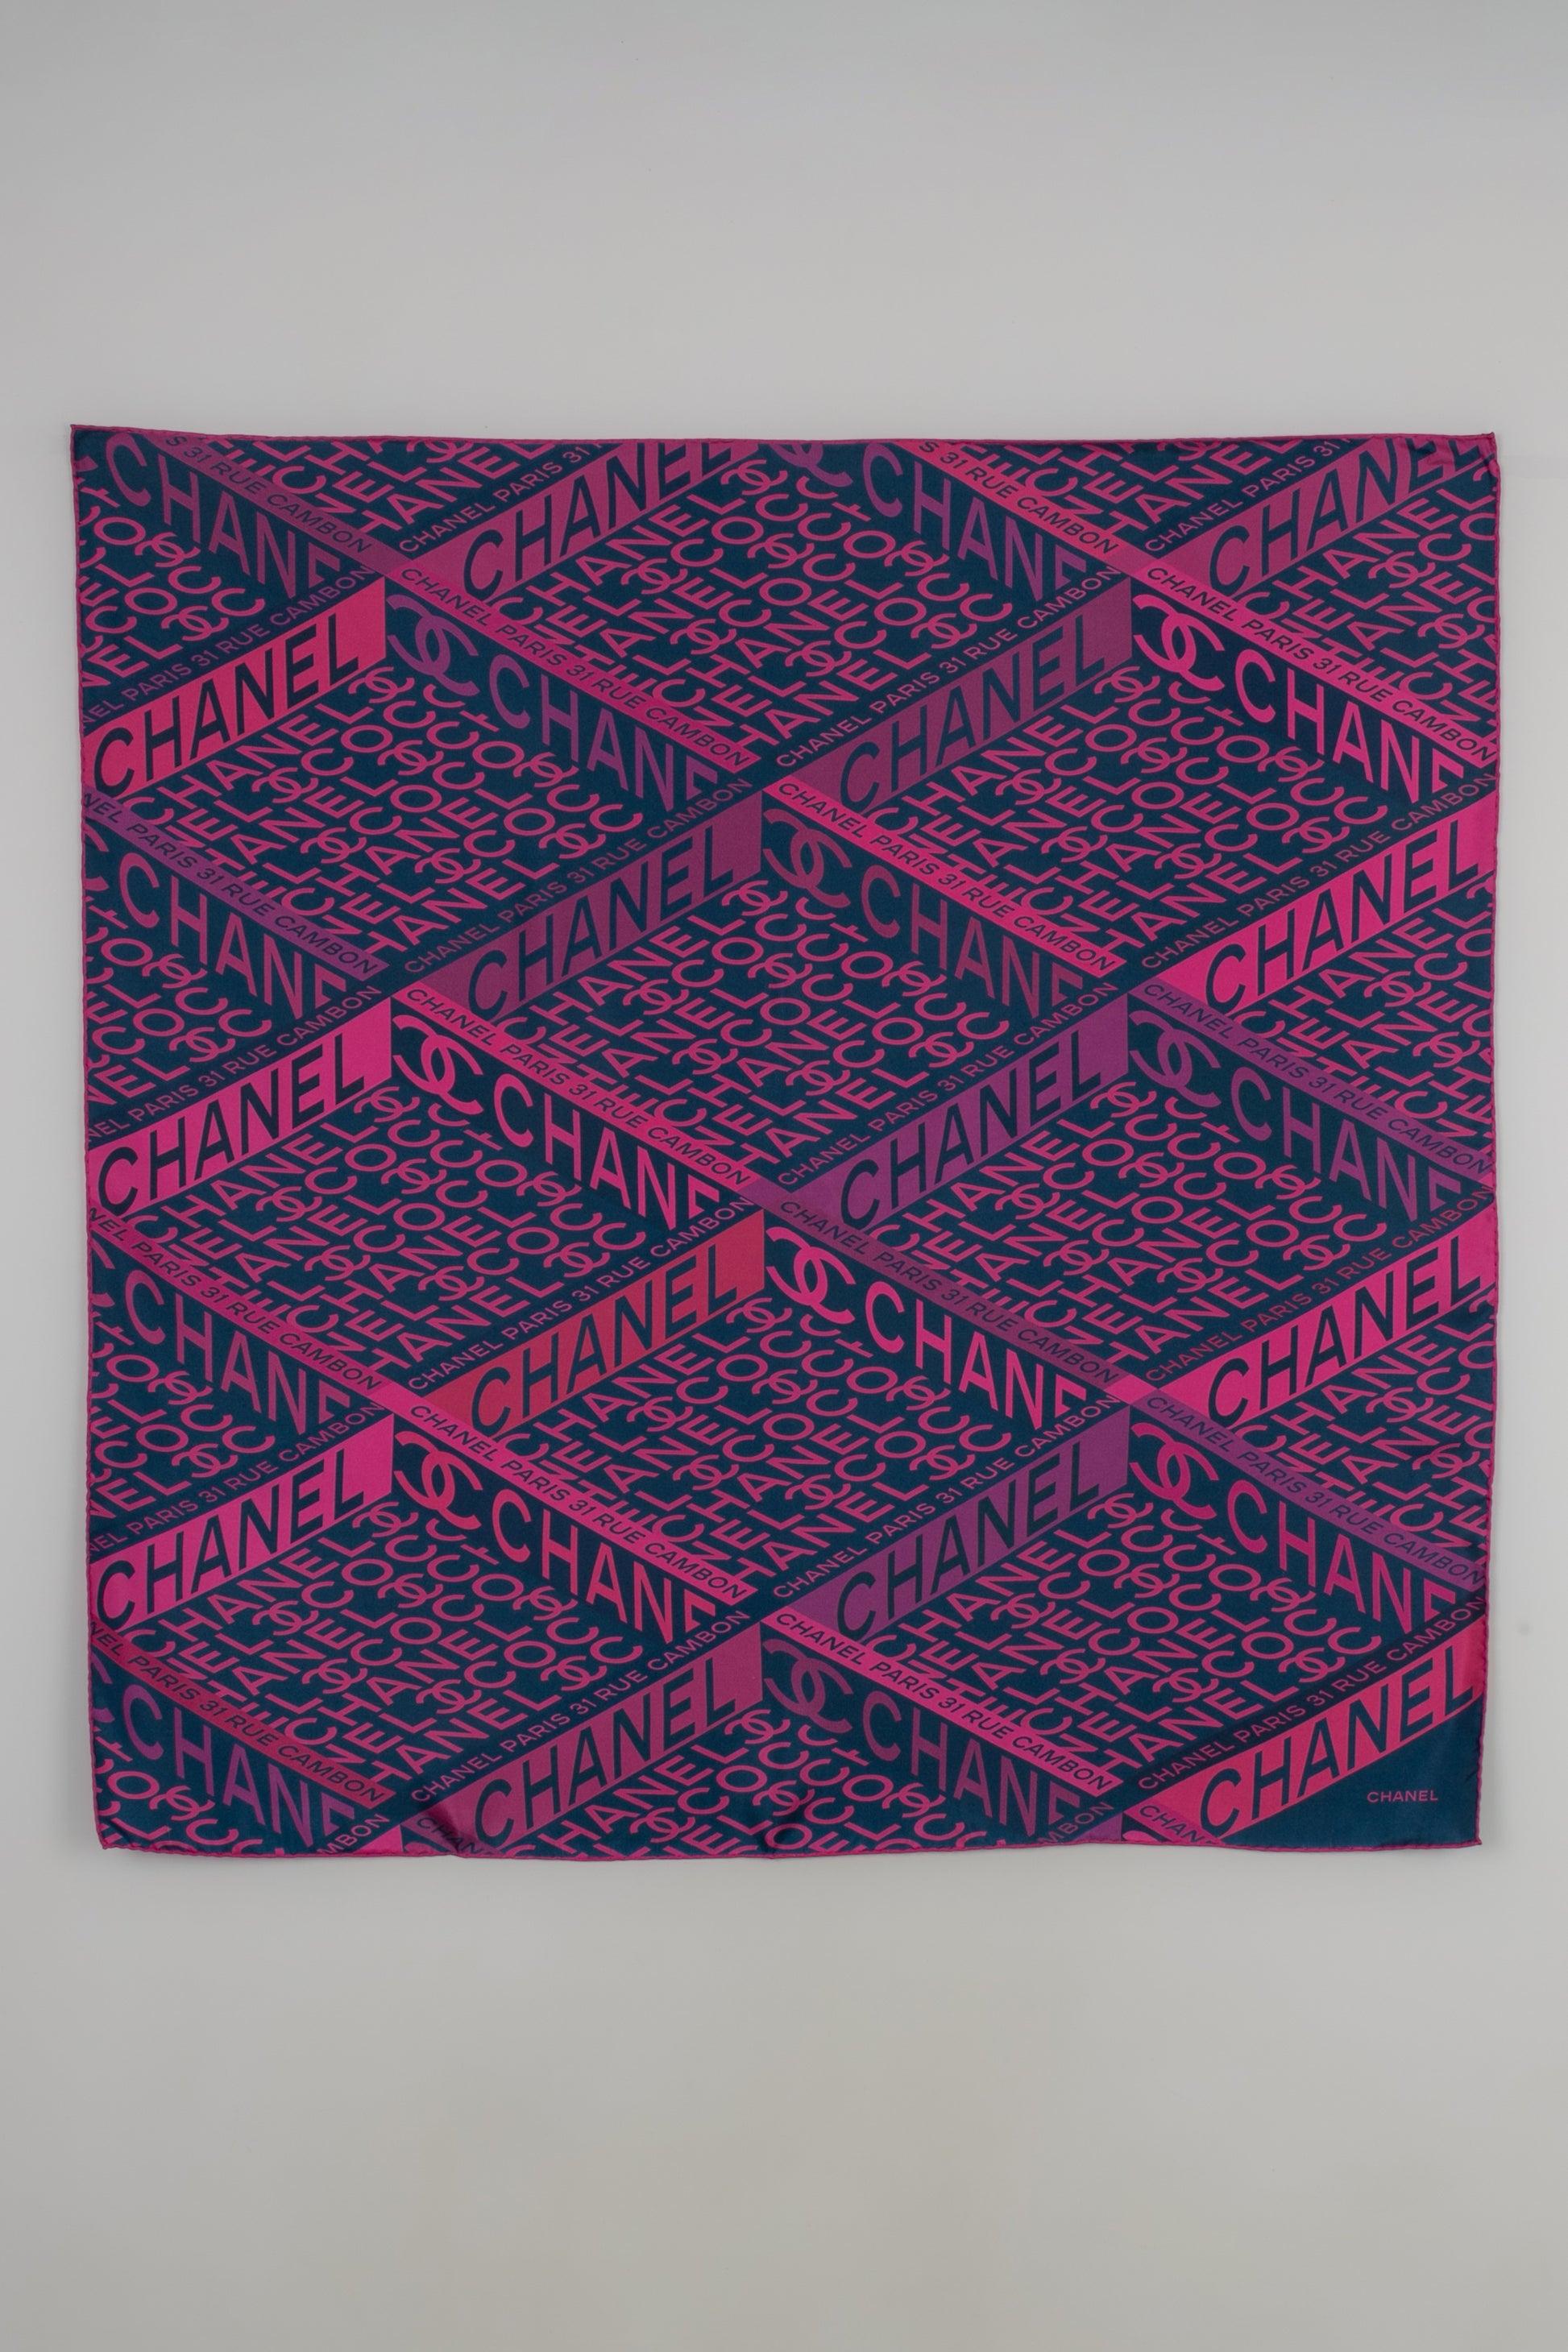 Chanel- Silk reversible foulard in navy blue and pink tones.

Additional information:
Condition: Very good condition
Dimensions: 90 cm x 90 cm

Seller Reference: FFC19
